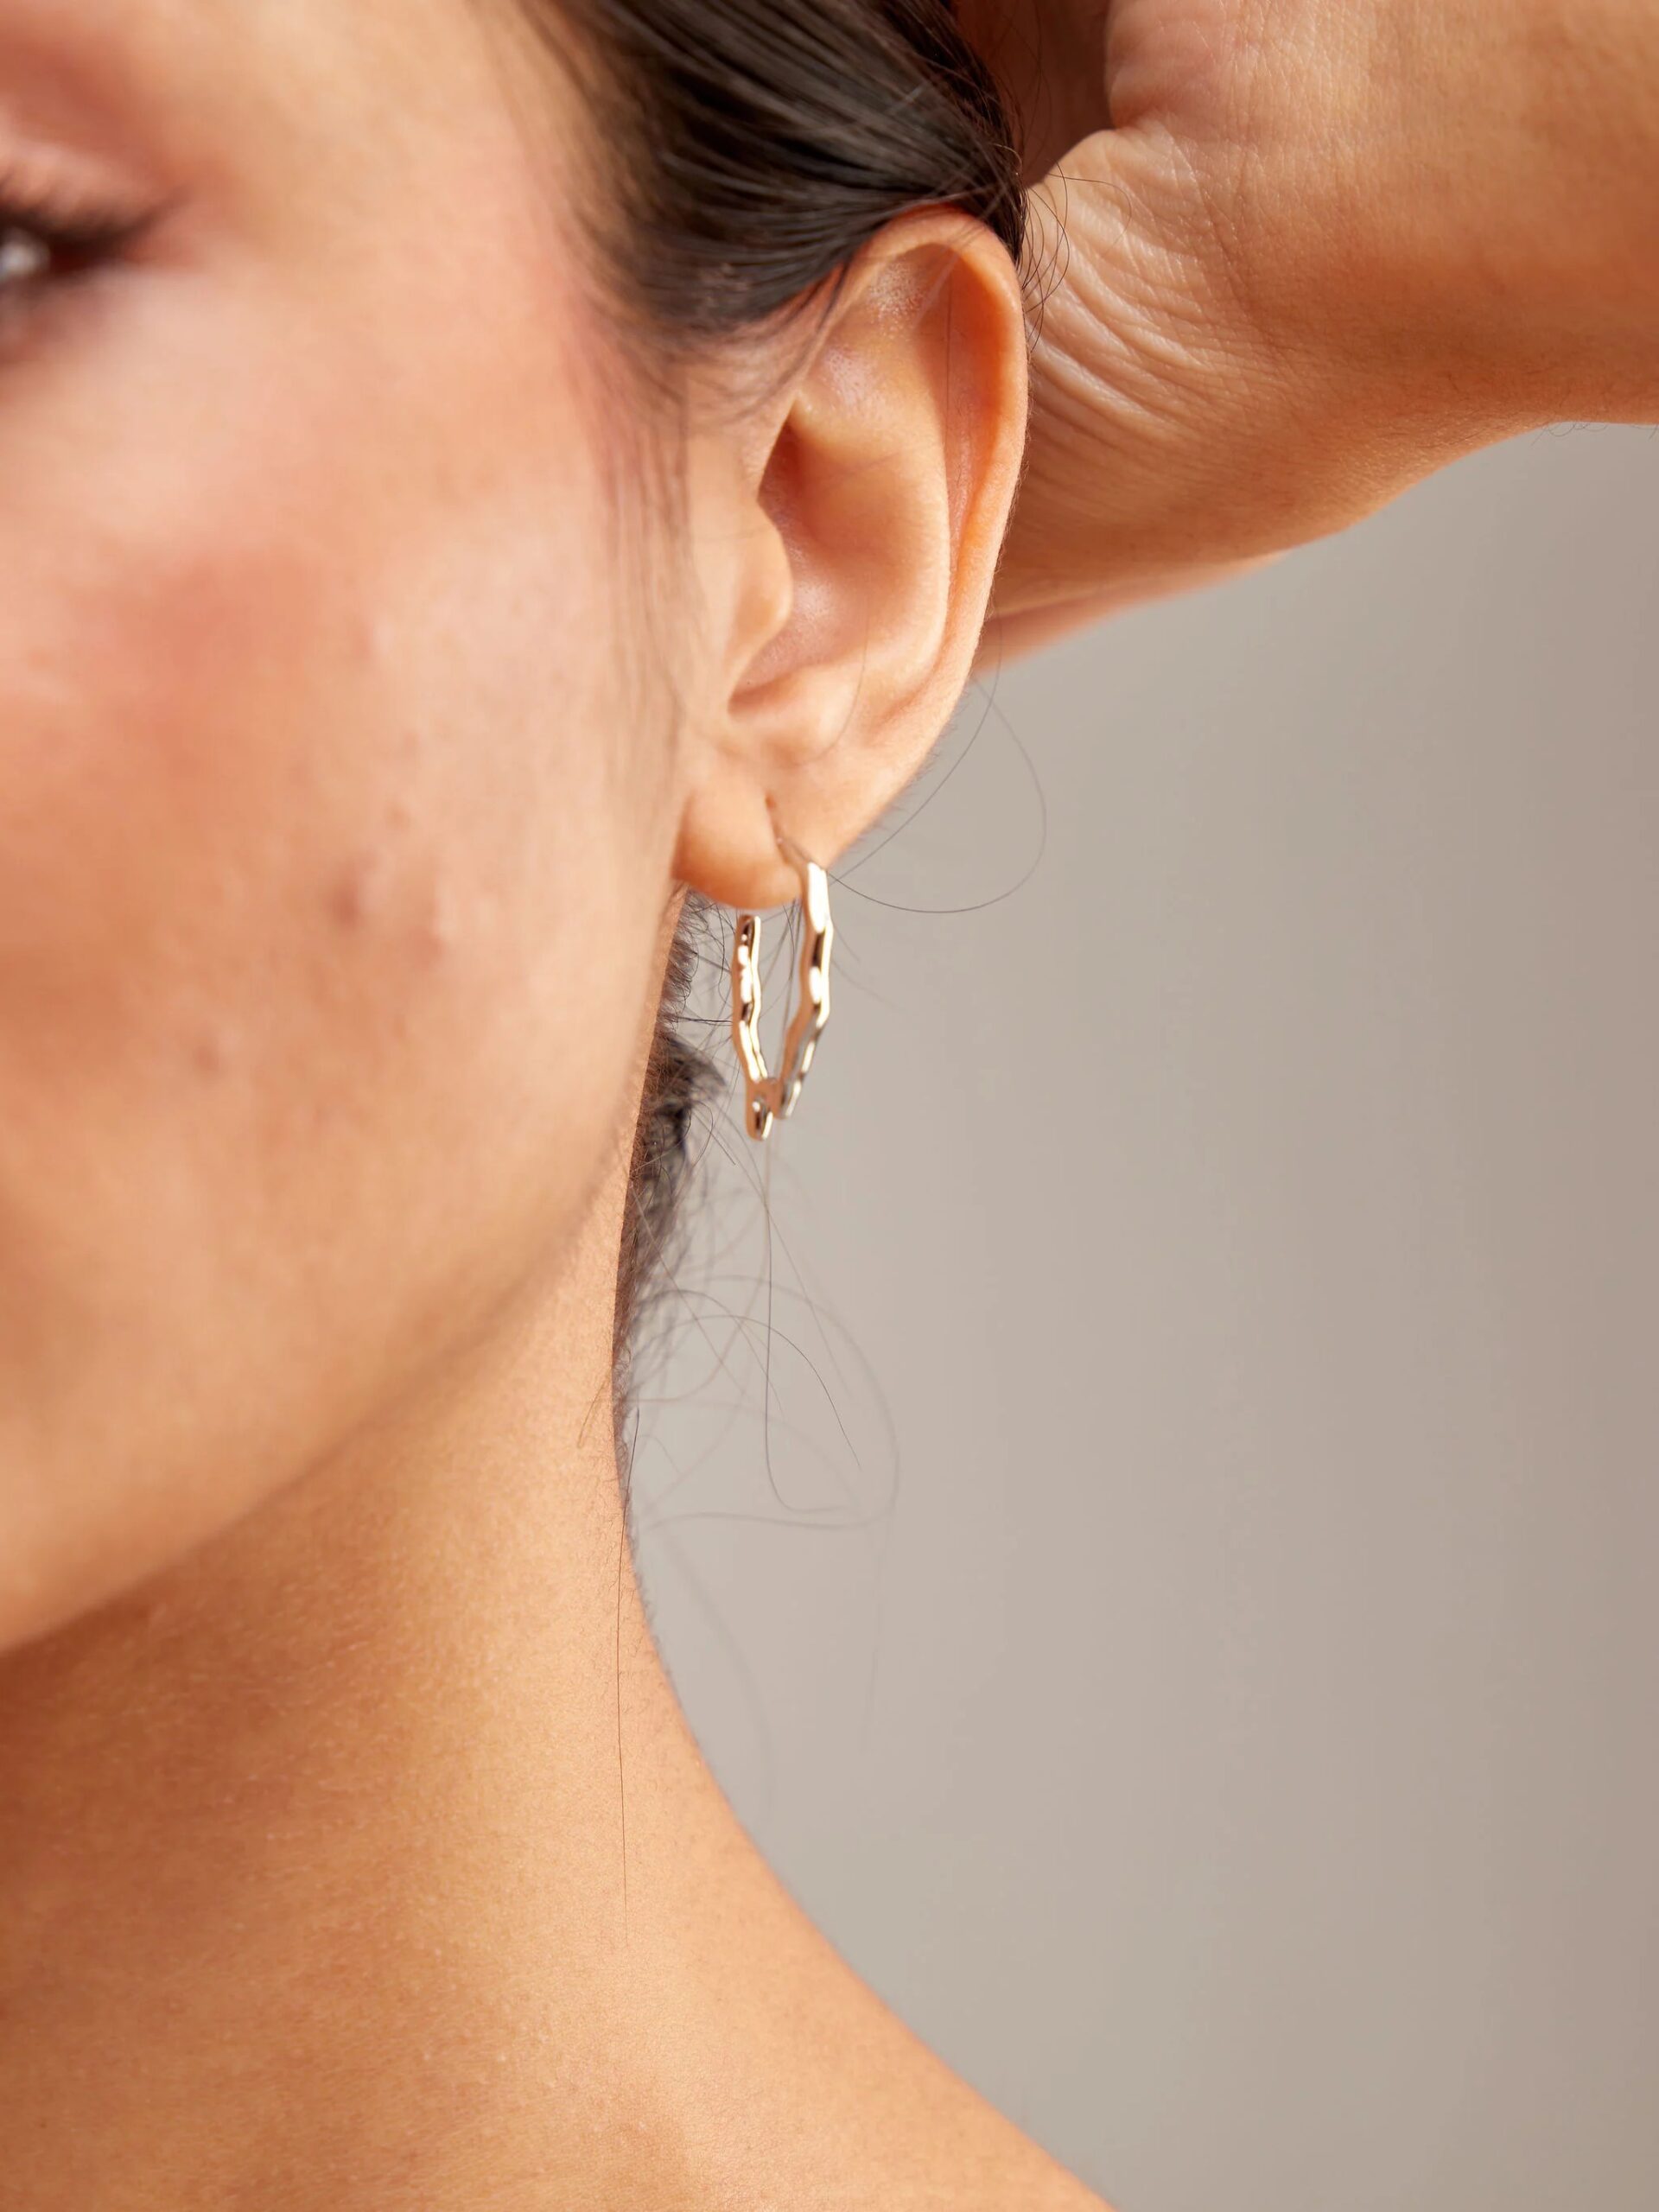 Close-up of a woman's ear wearing a delicate, gold hoop earring, with her hand gently lifting her hair.